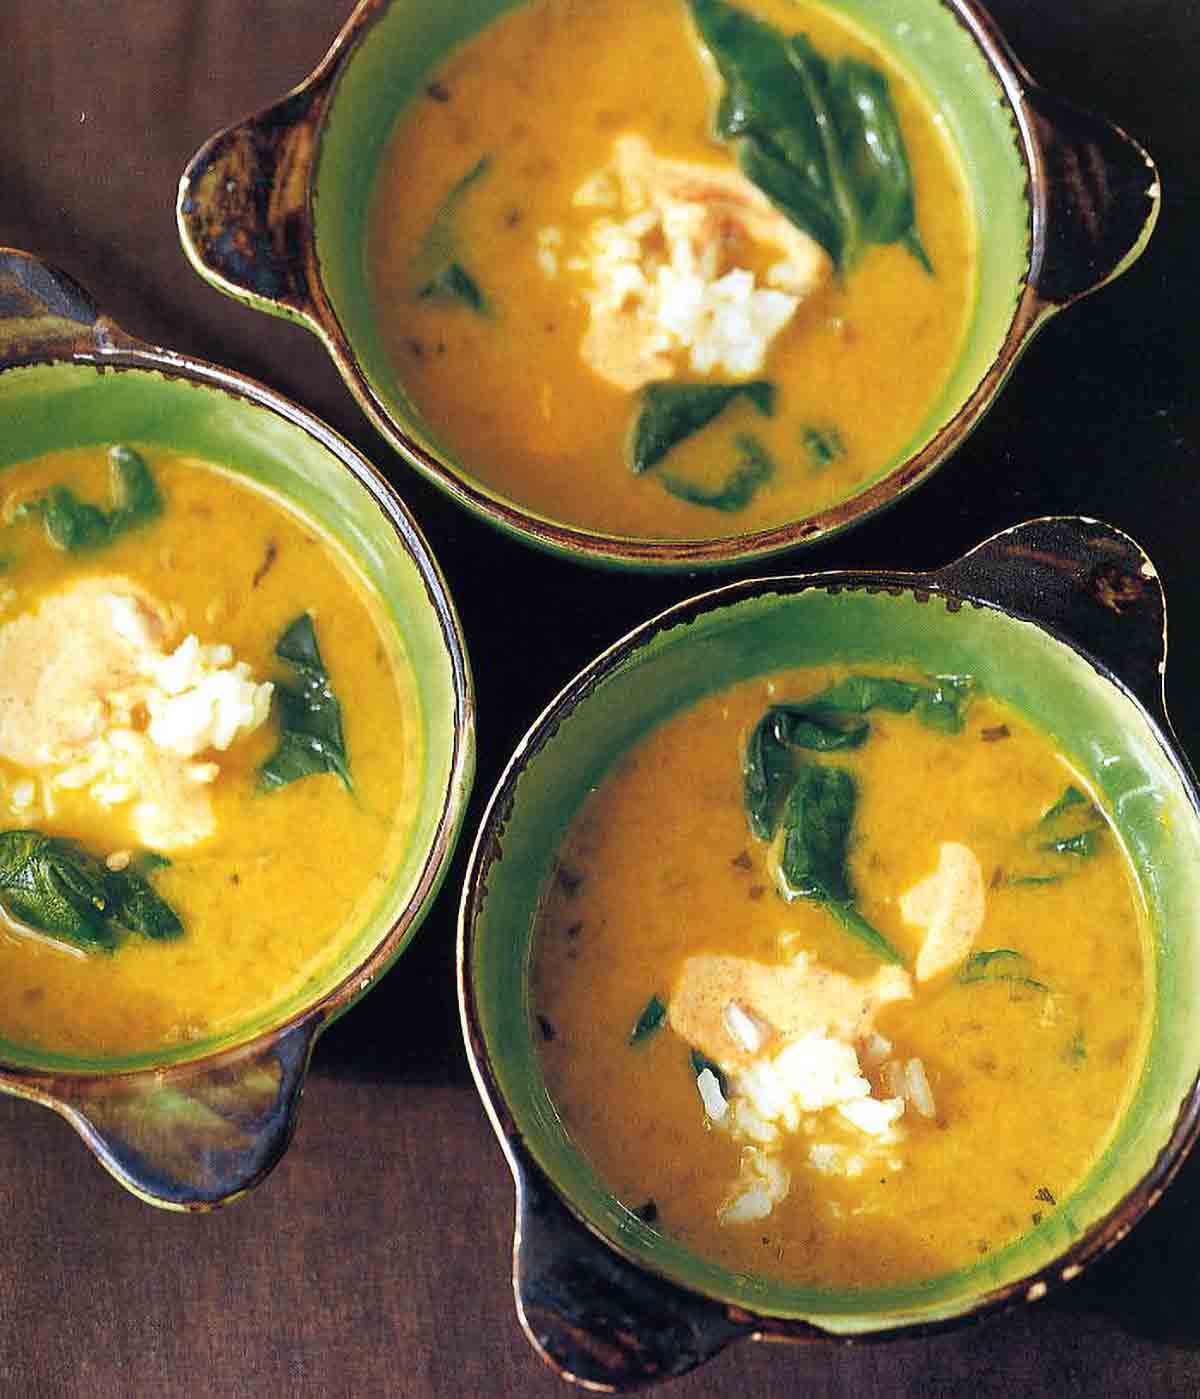 Three bowls of yellow pea and coconut milk soup with pieces of spinach and a dollop of yogurt in each bowl.